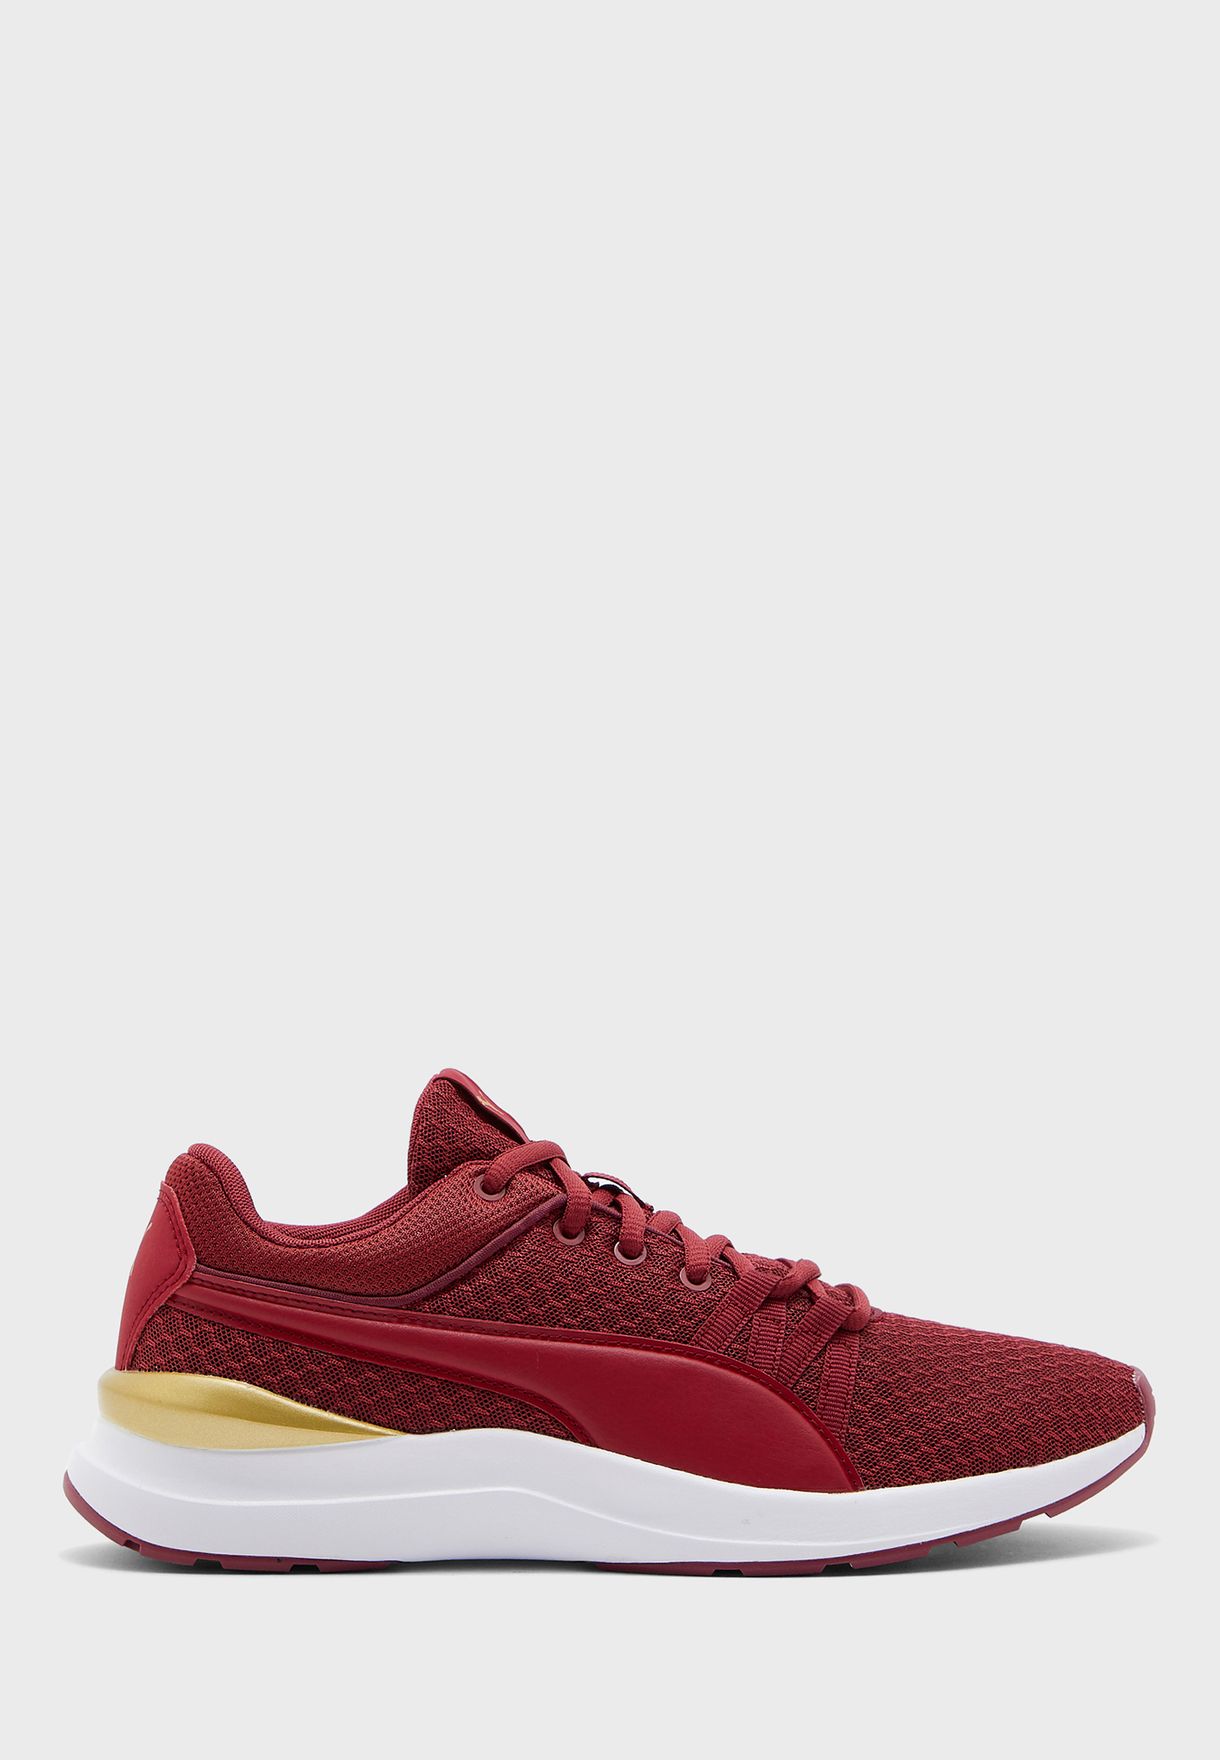 puma red shoes for women